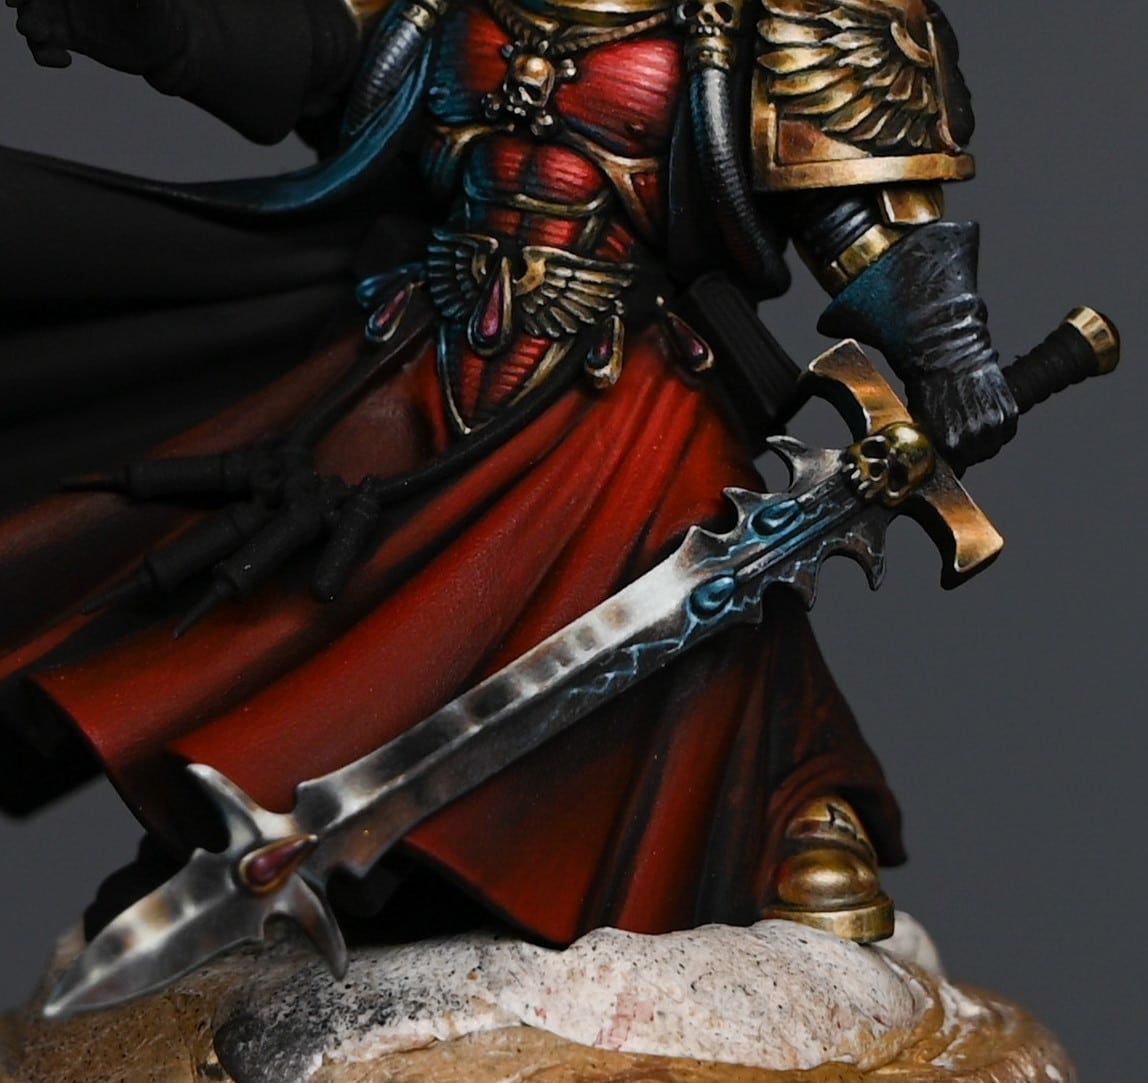 How to Paint a Non-Metallic Metal Sword with Lightning!